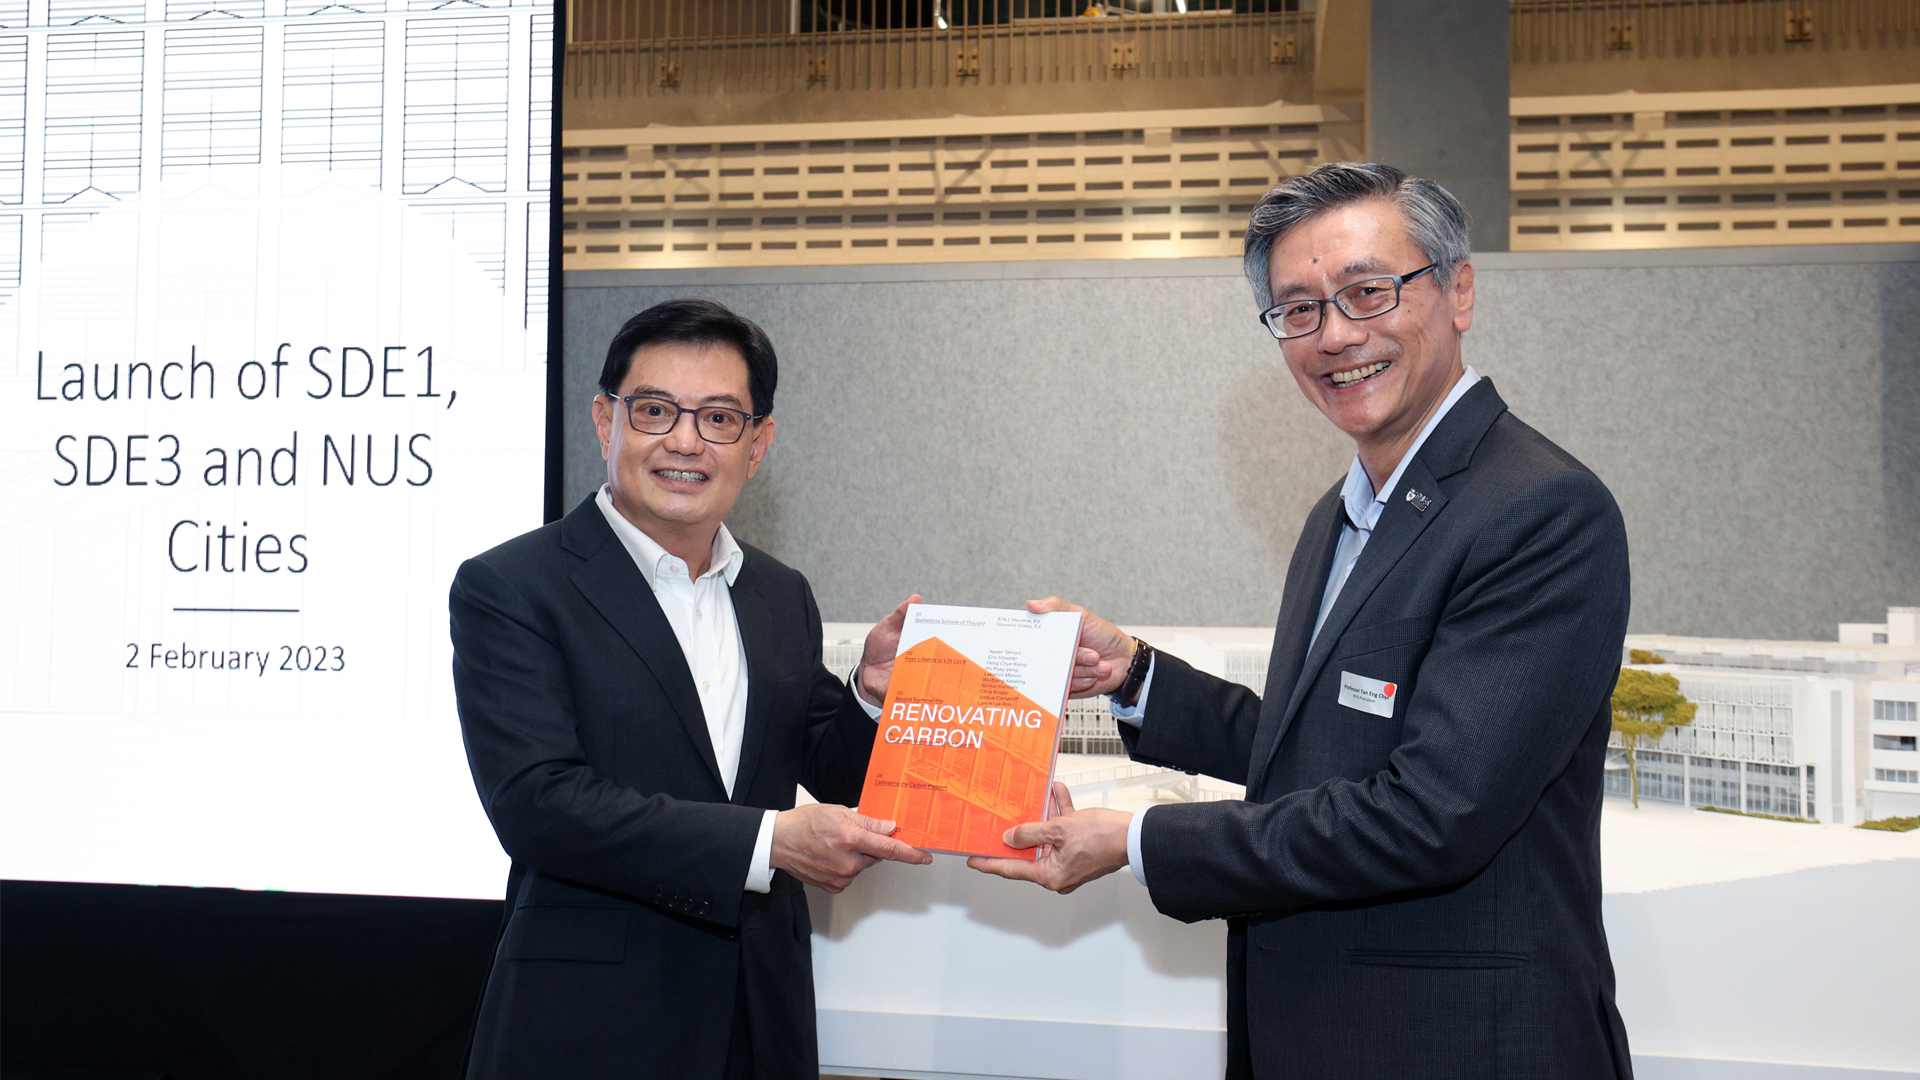 NUS President Prof Tan Eng Chye (right) presenting the book entitled 'Renovating Carbon' to Deputy Prime Minister Heng Swee Keat (left).